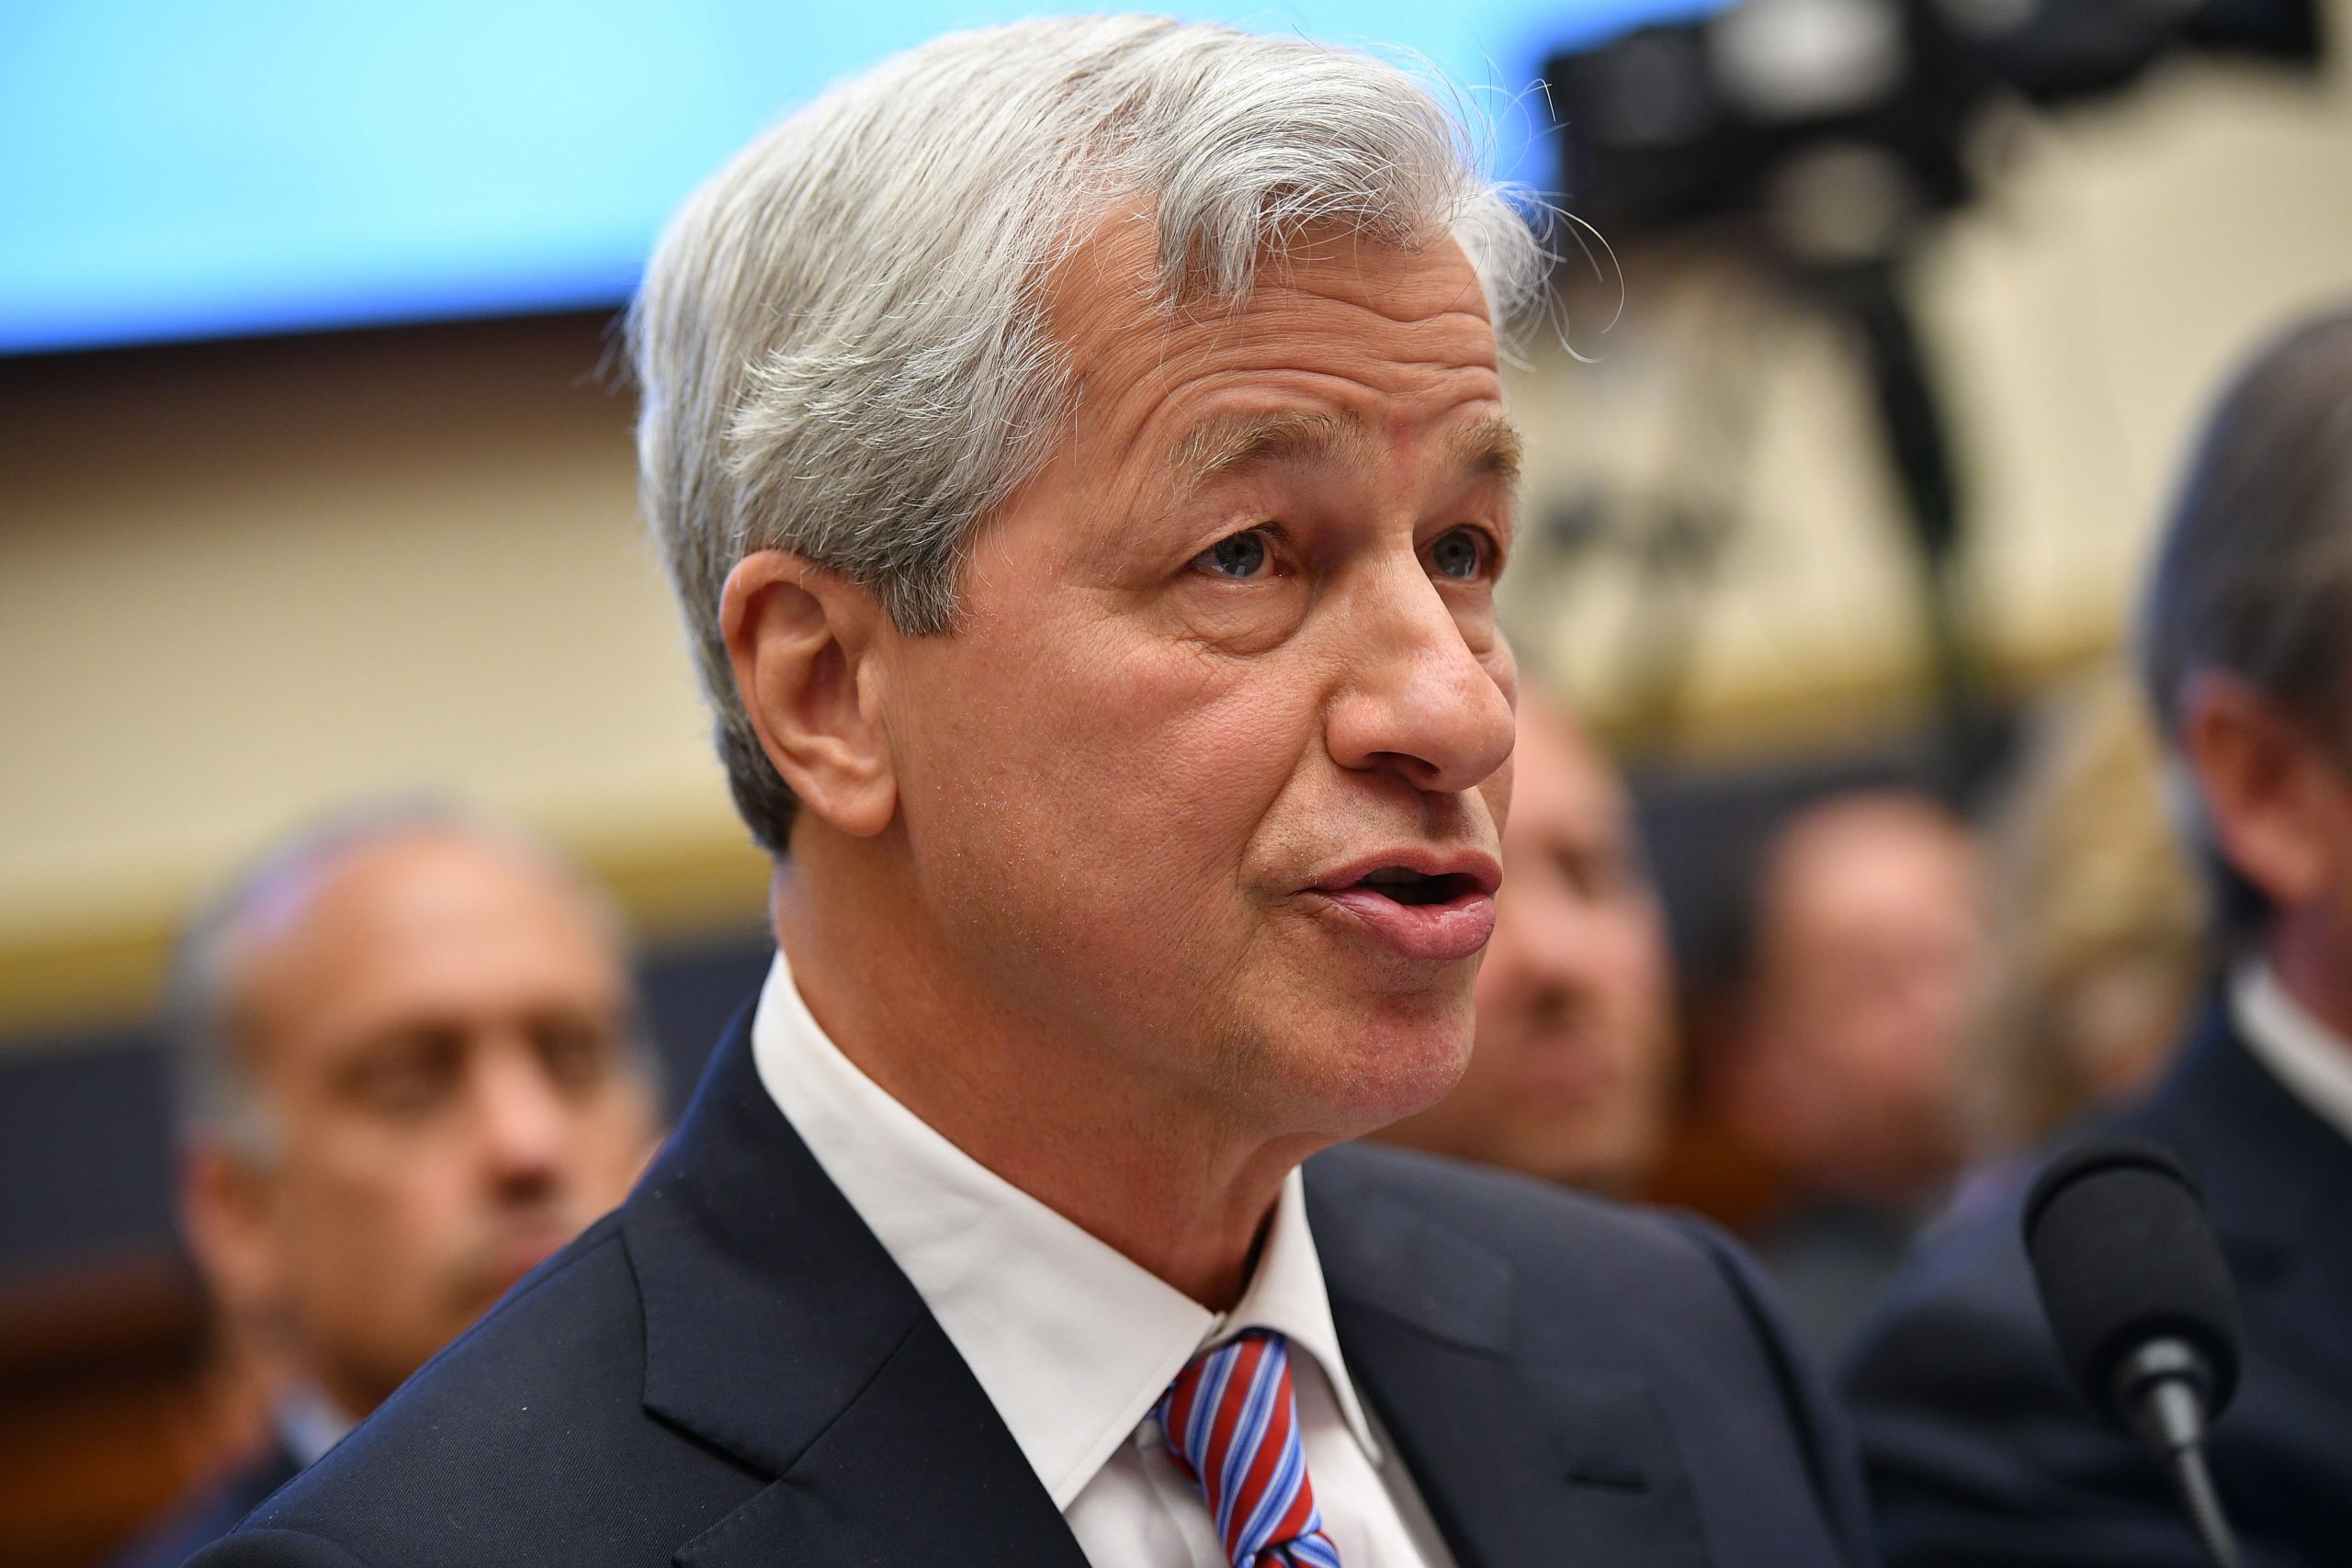 Dimon says he is ‘disgusted by racism’ and progress wanted after report